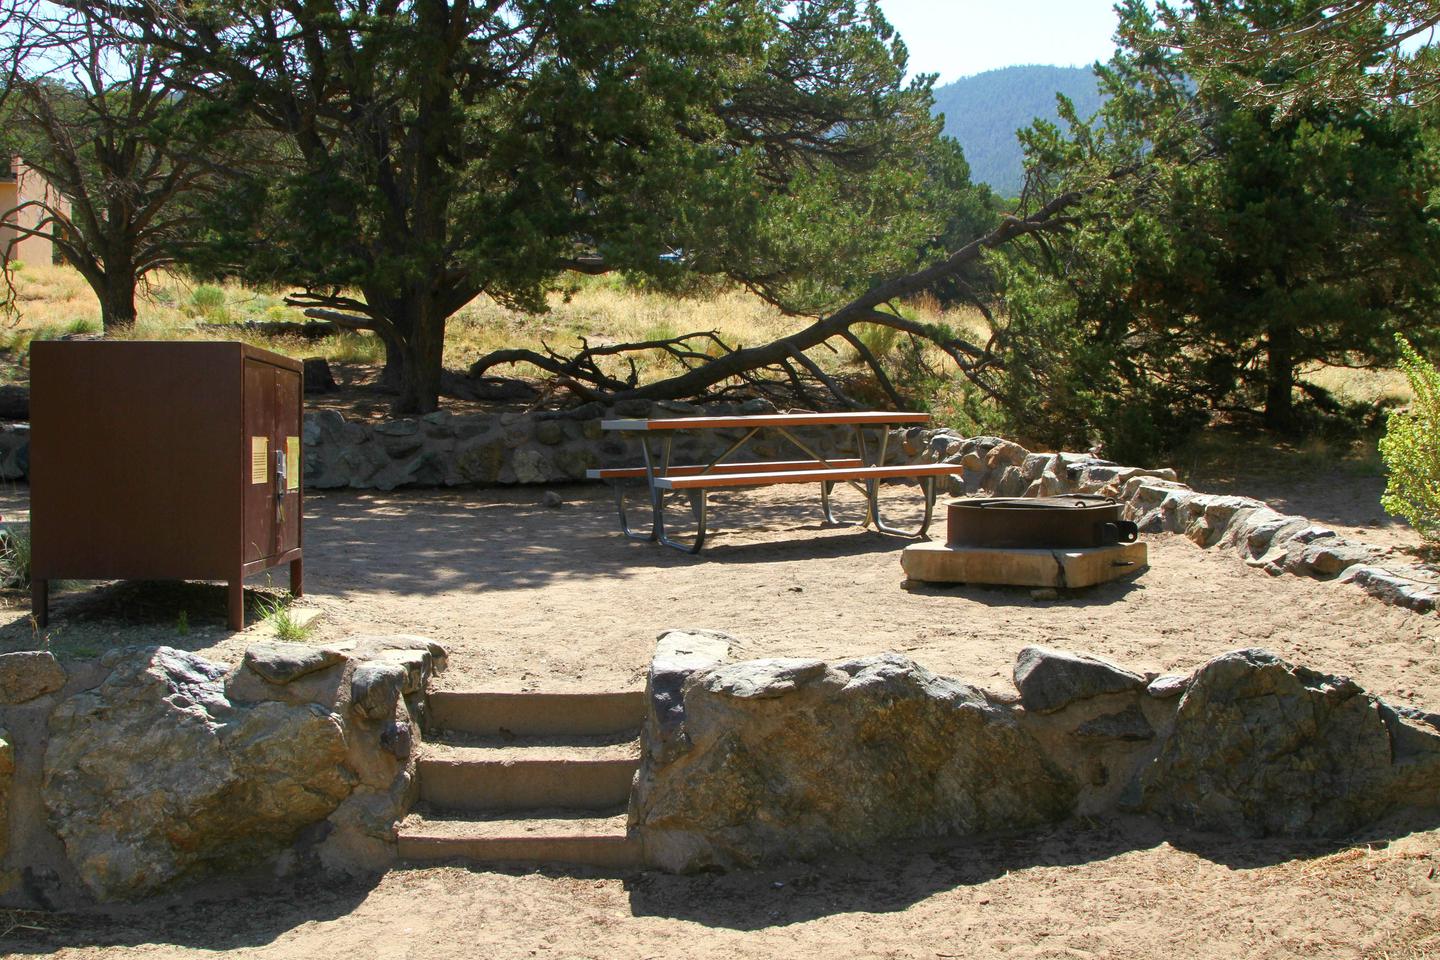 Closer view of Site #72 tent pad and stairs up from the parking pad, with bear box, picnic table, and fire ring. Pine trees in the background.Site #72, Pinon Flats Campground